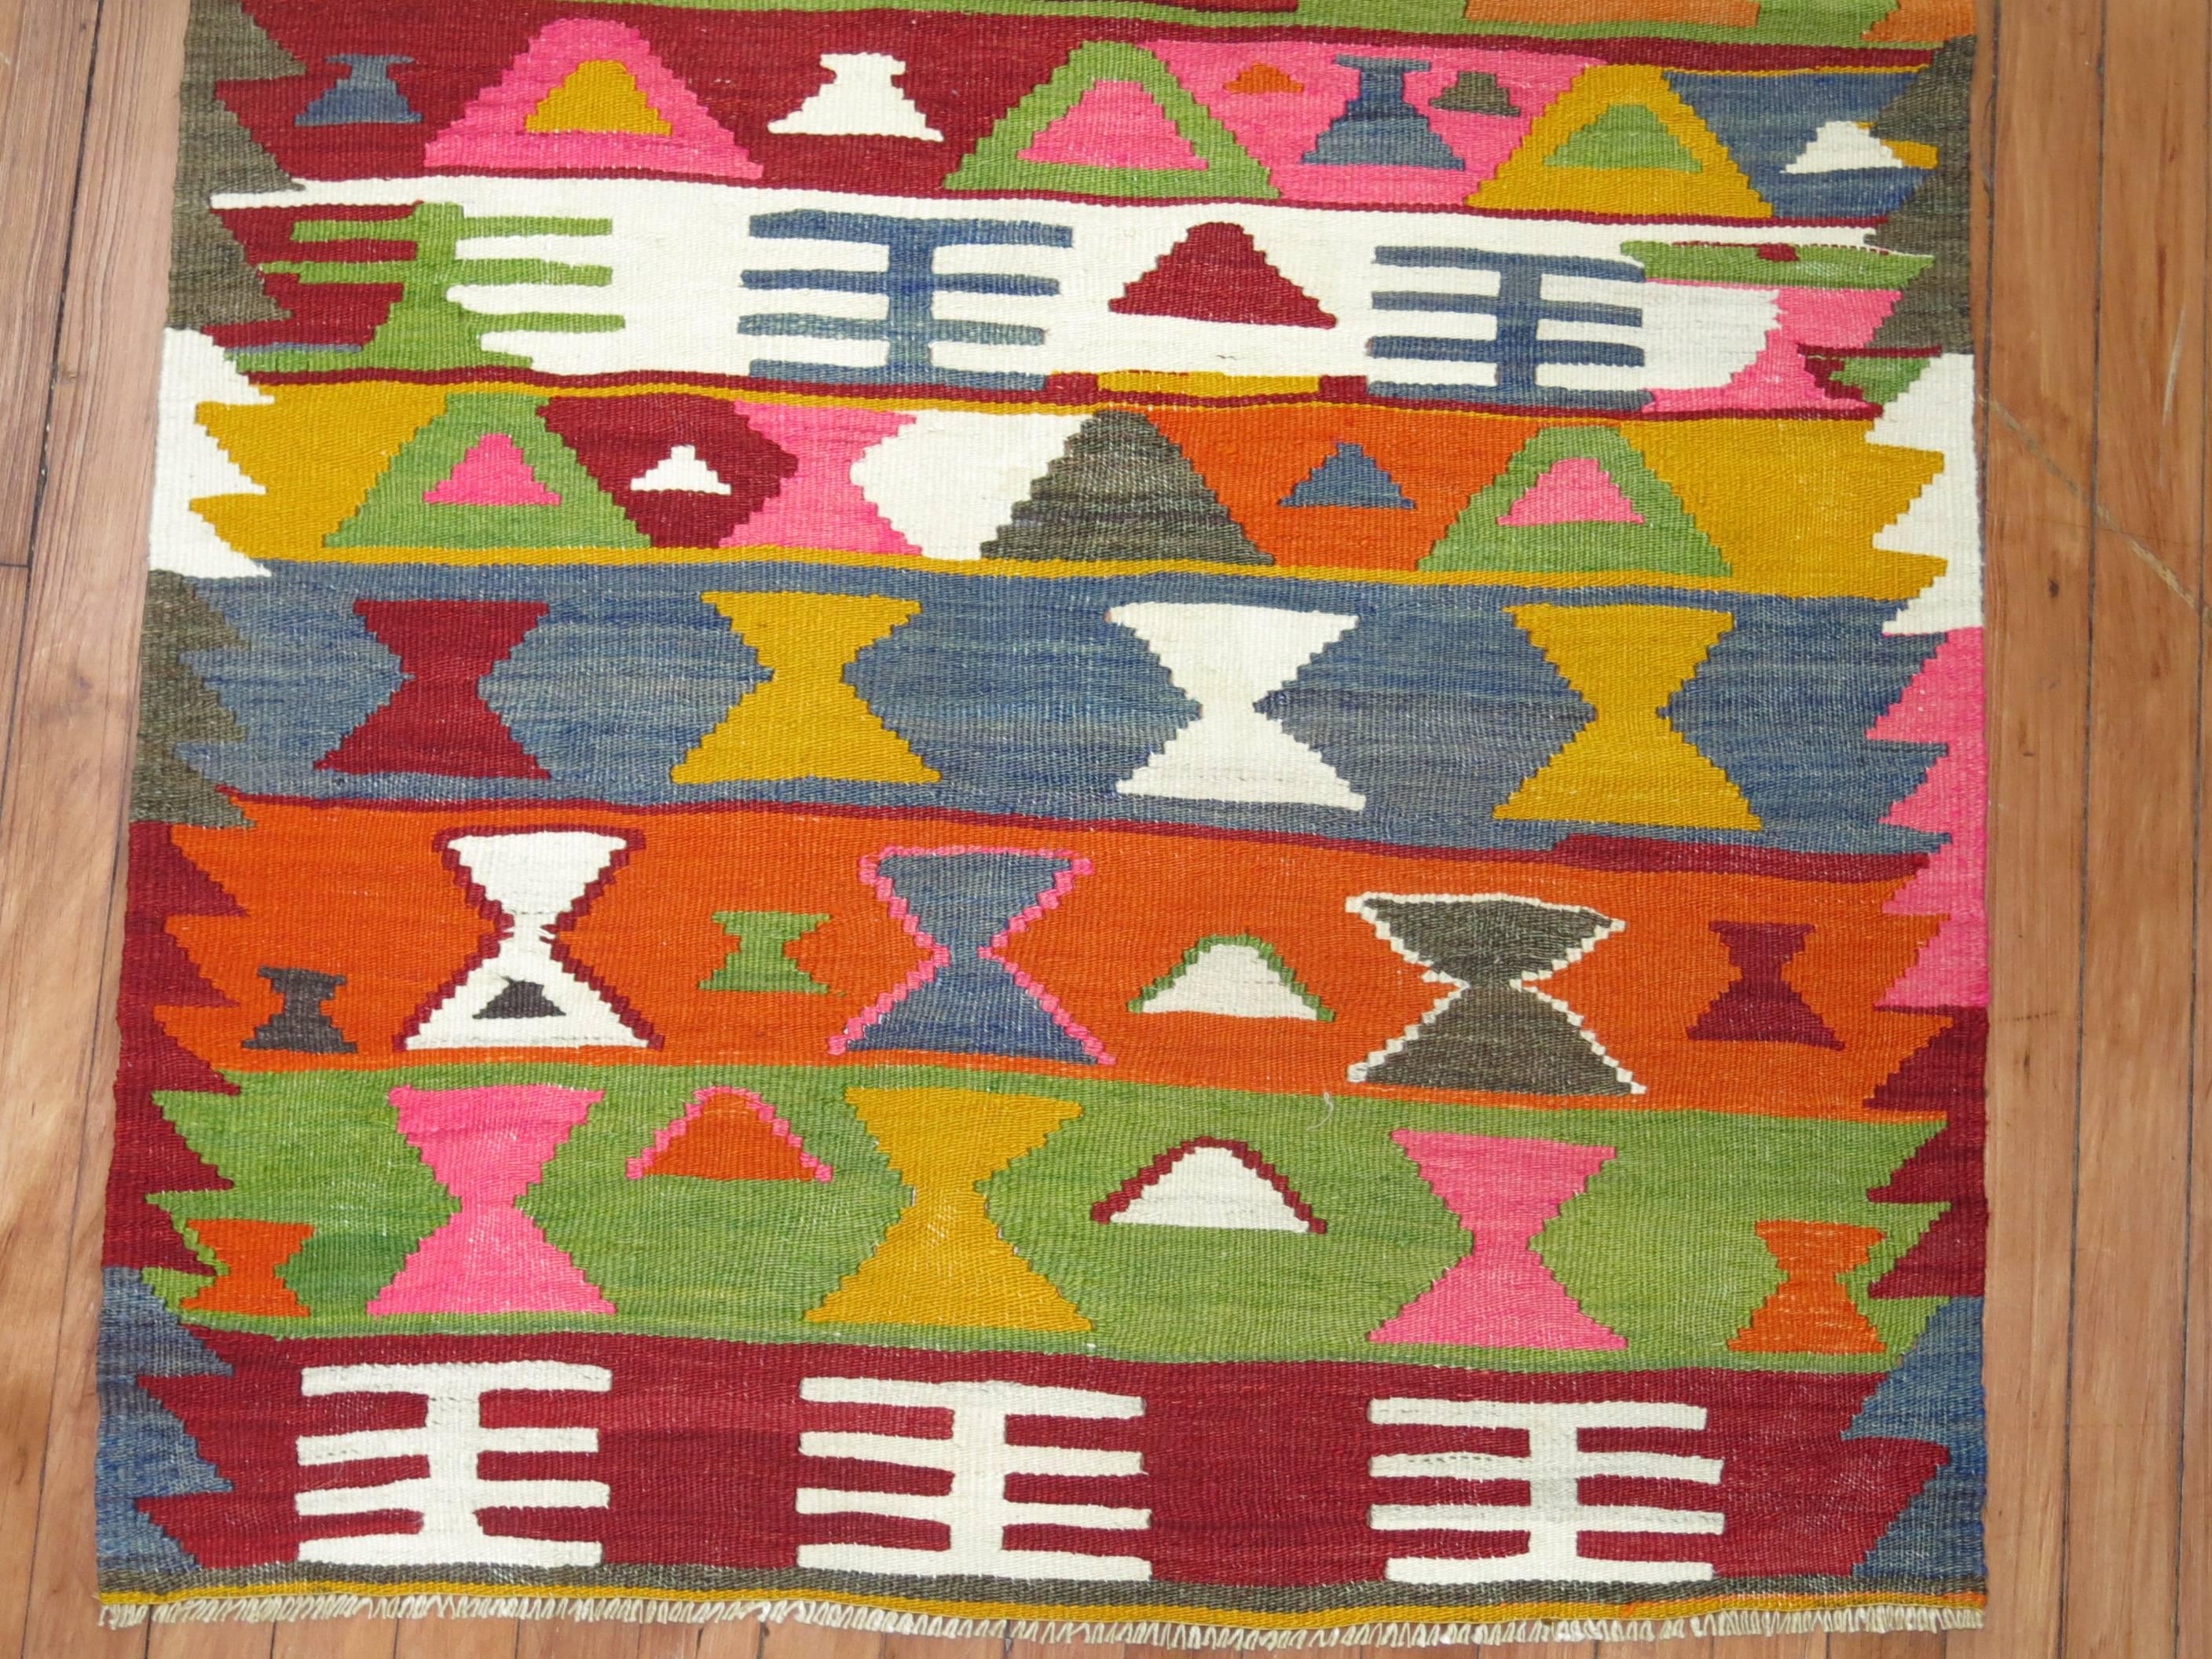 Jazzy colors highlight this vintage Turkish Kilim runner.  Take a Plunge !

3' x 9' mid 20th century